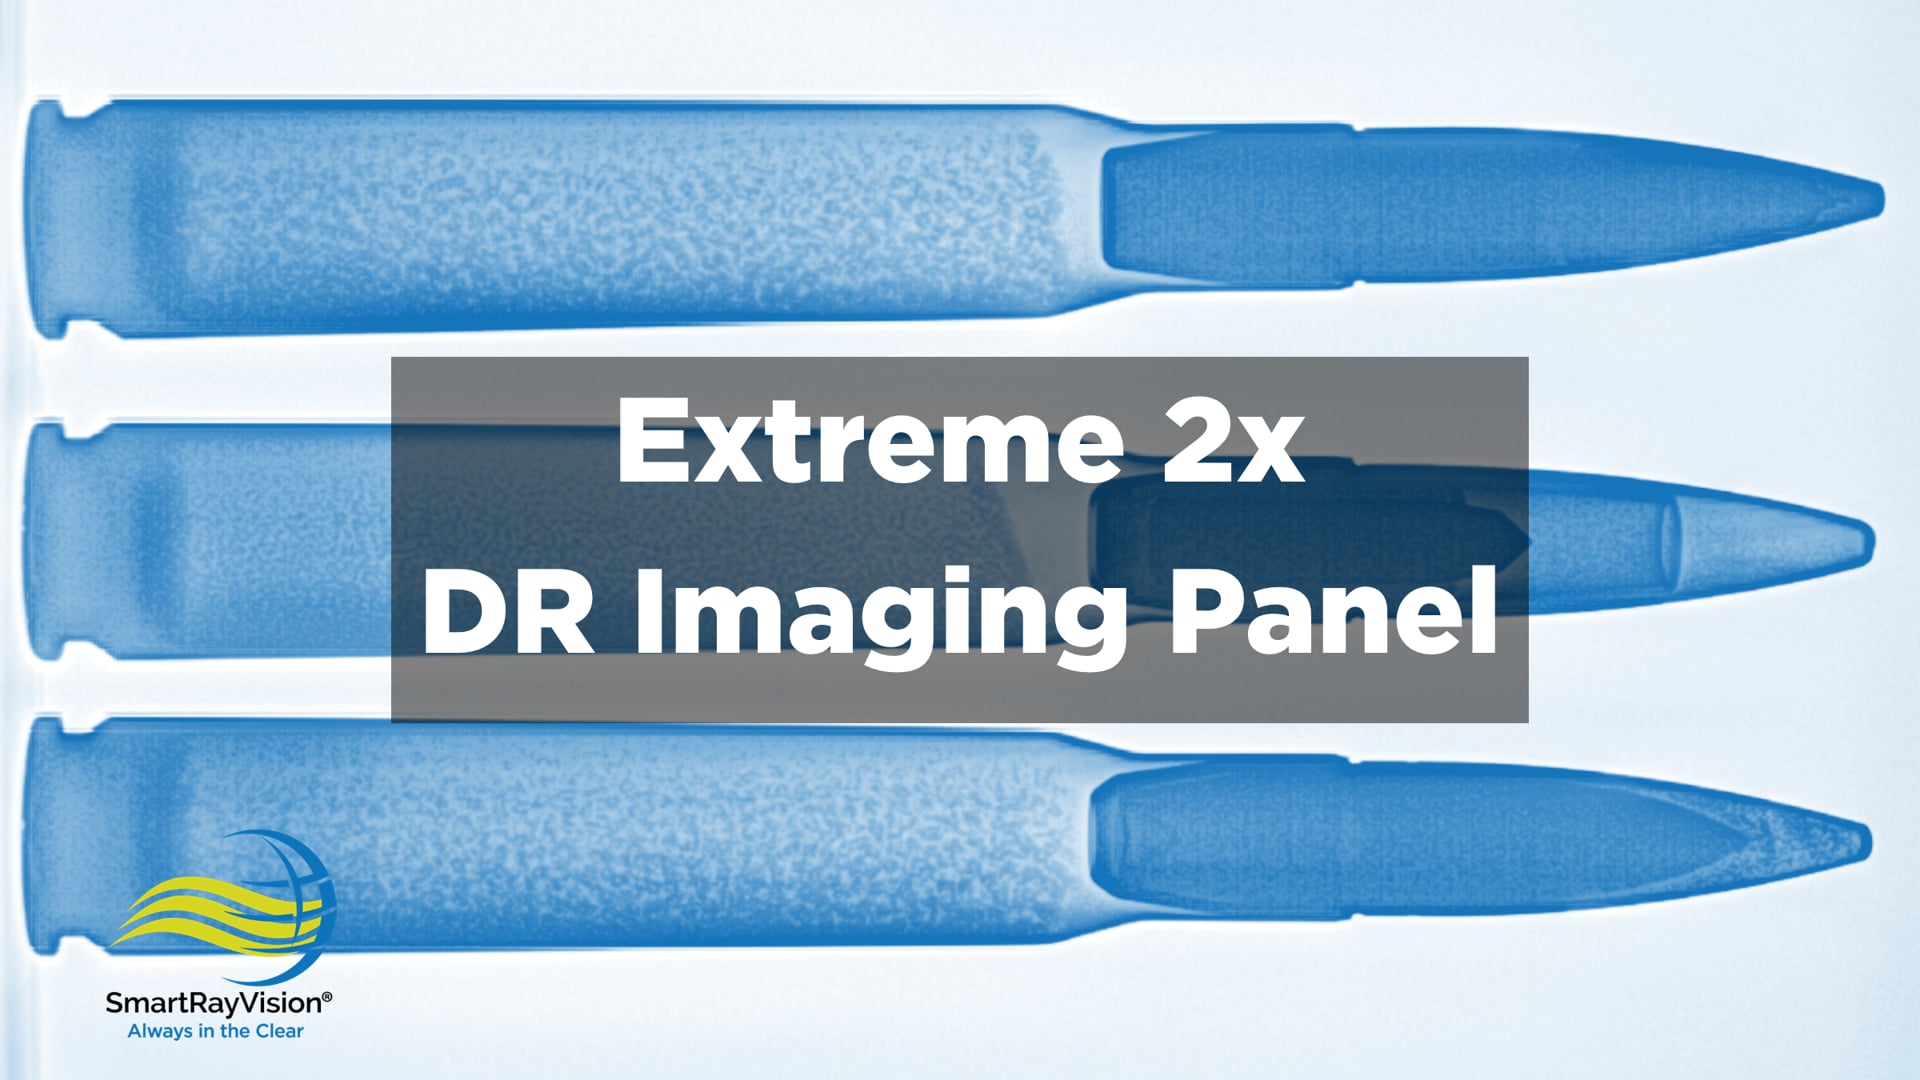 Extreme 2x DR Imaging Panel